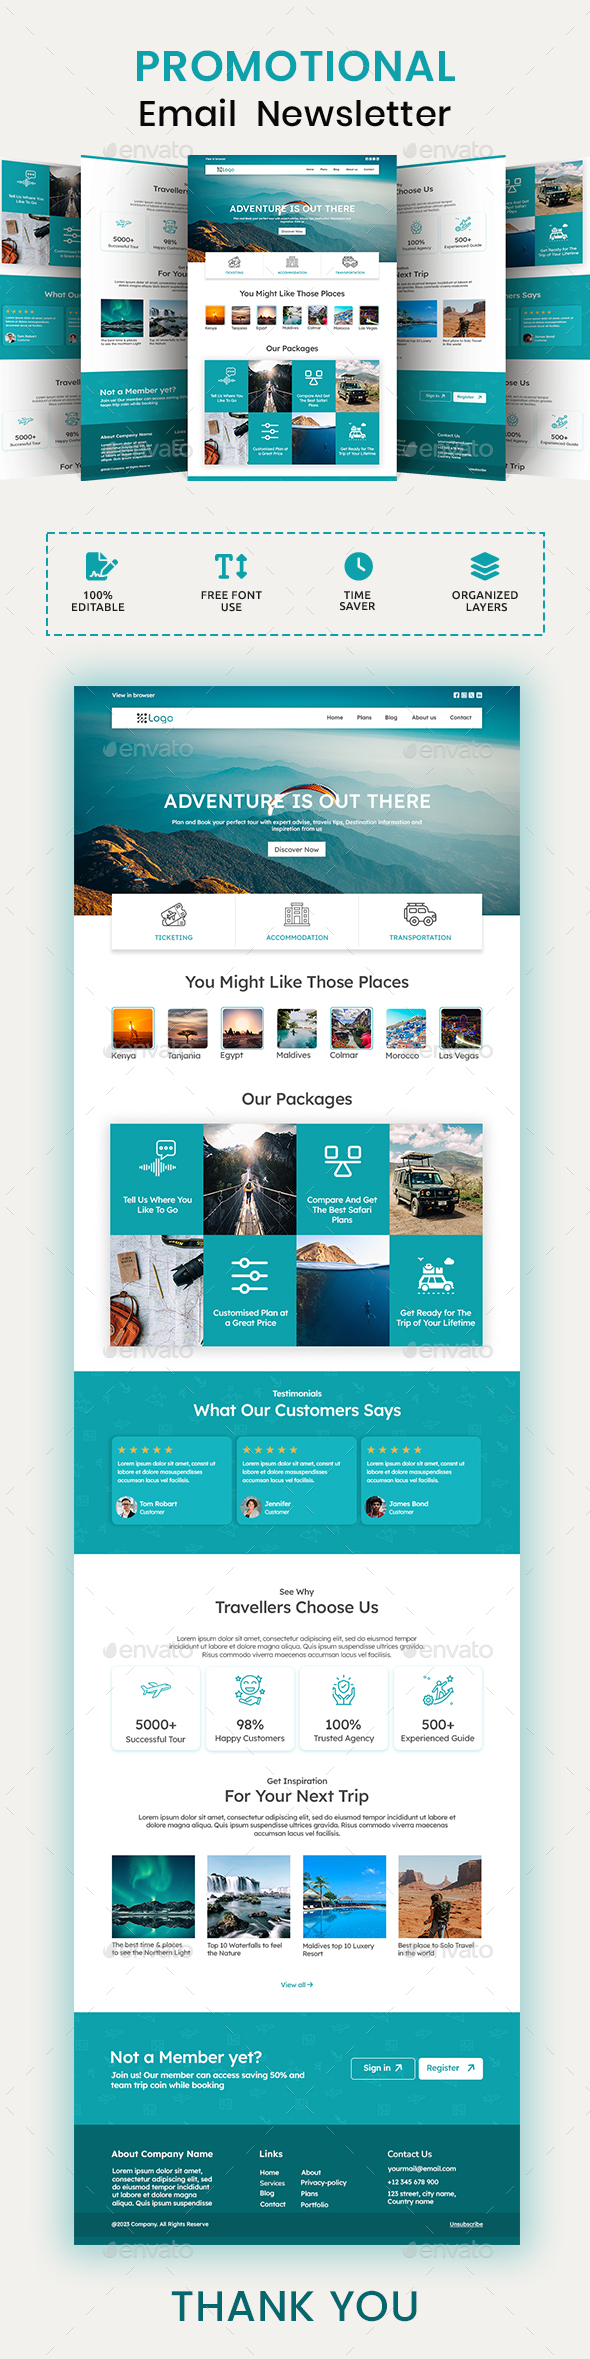 Adventure Tourism Email Newsletter PSD Template